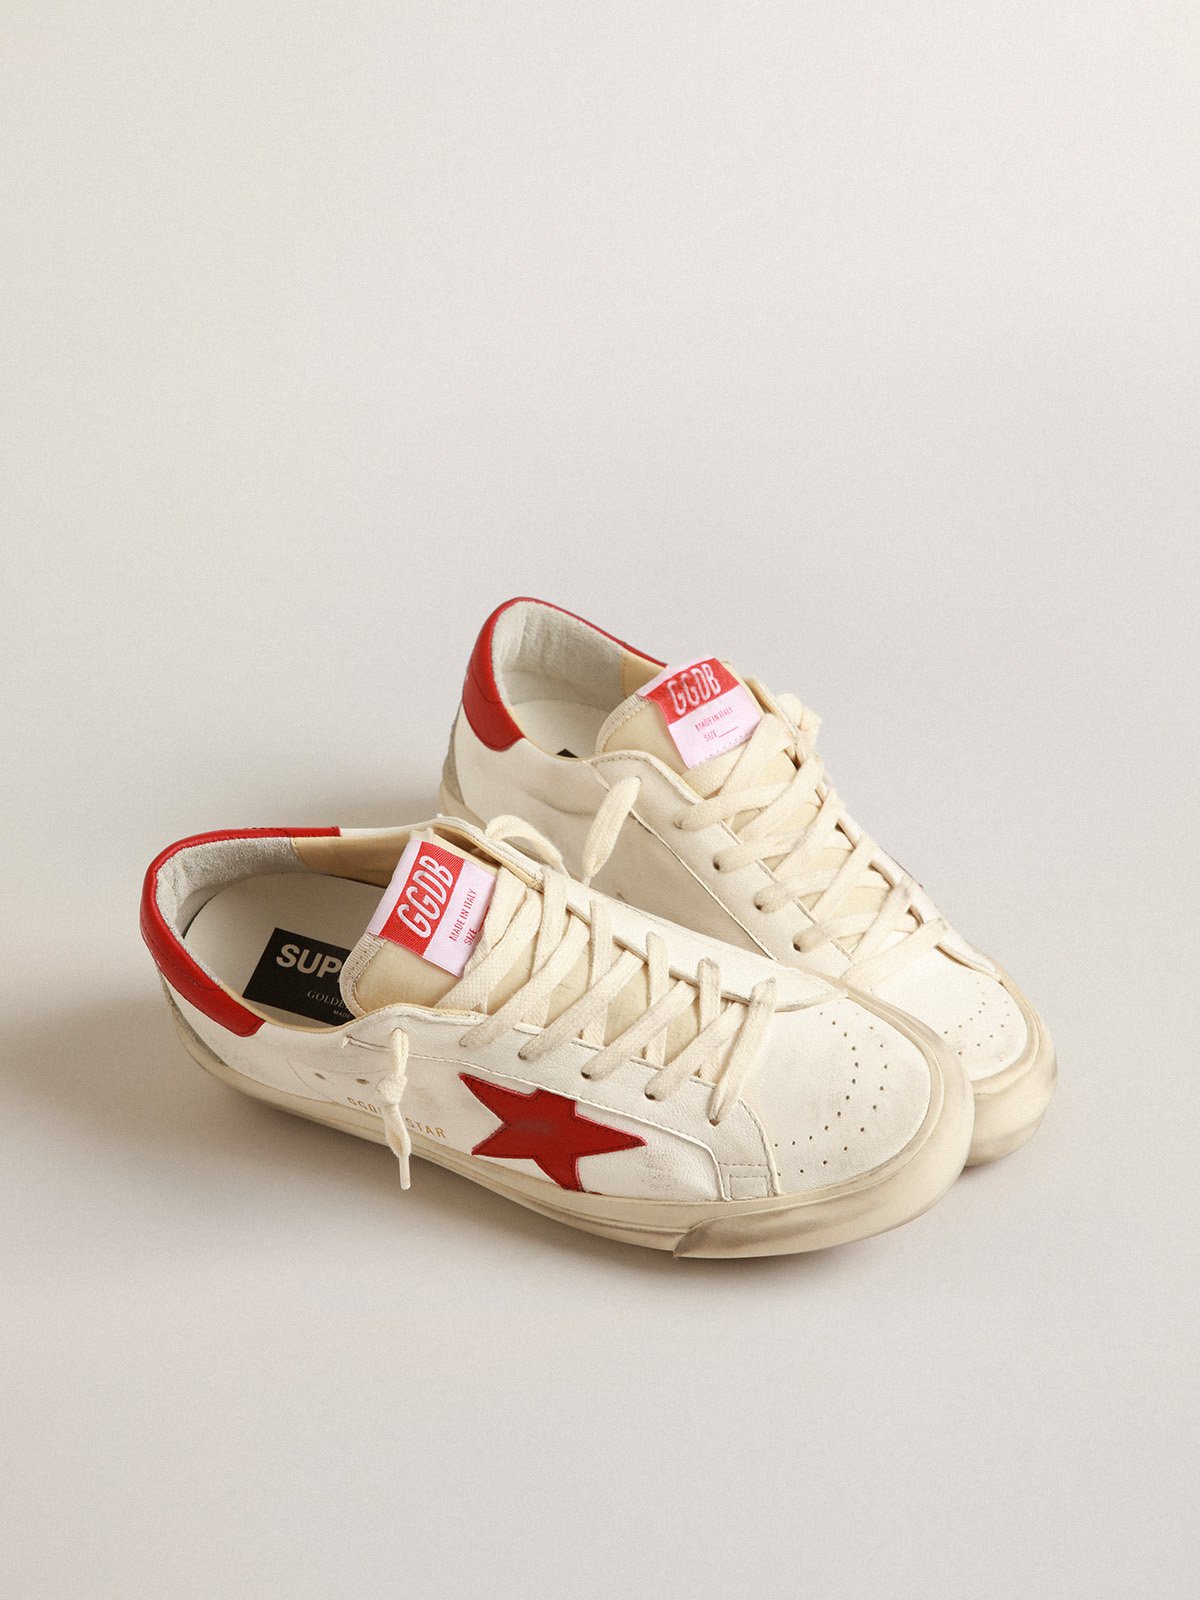 Men's Super-Star LTD in nappa leather with red star and heel tab